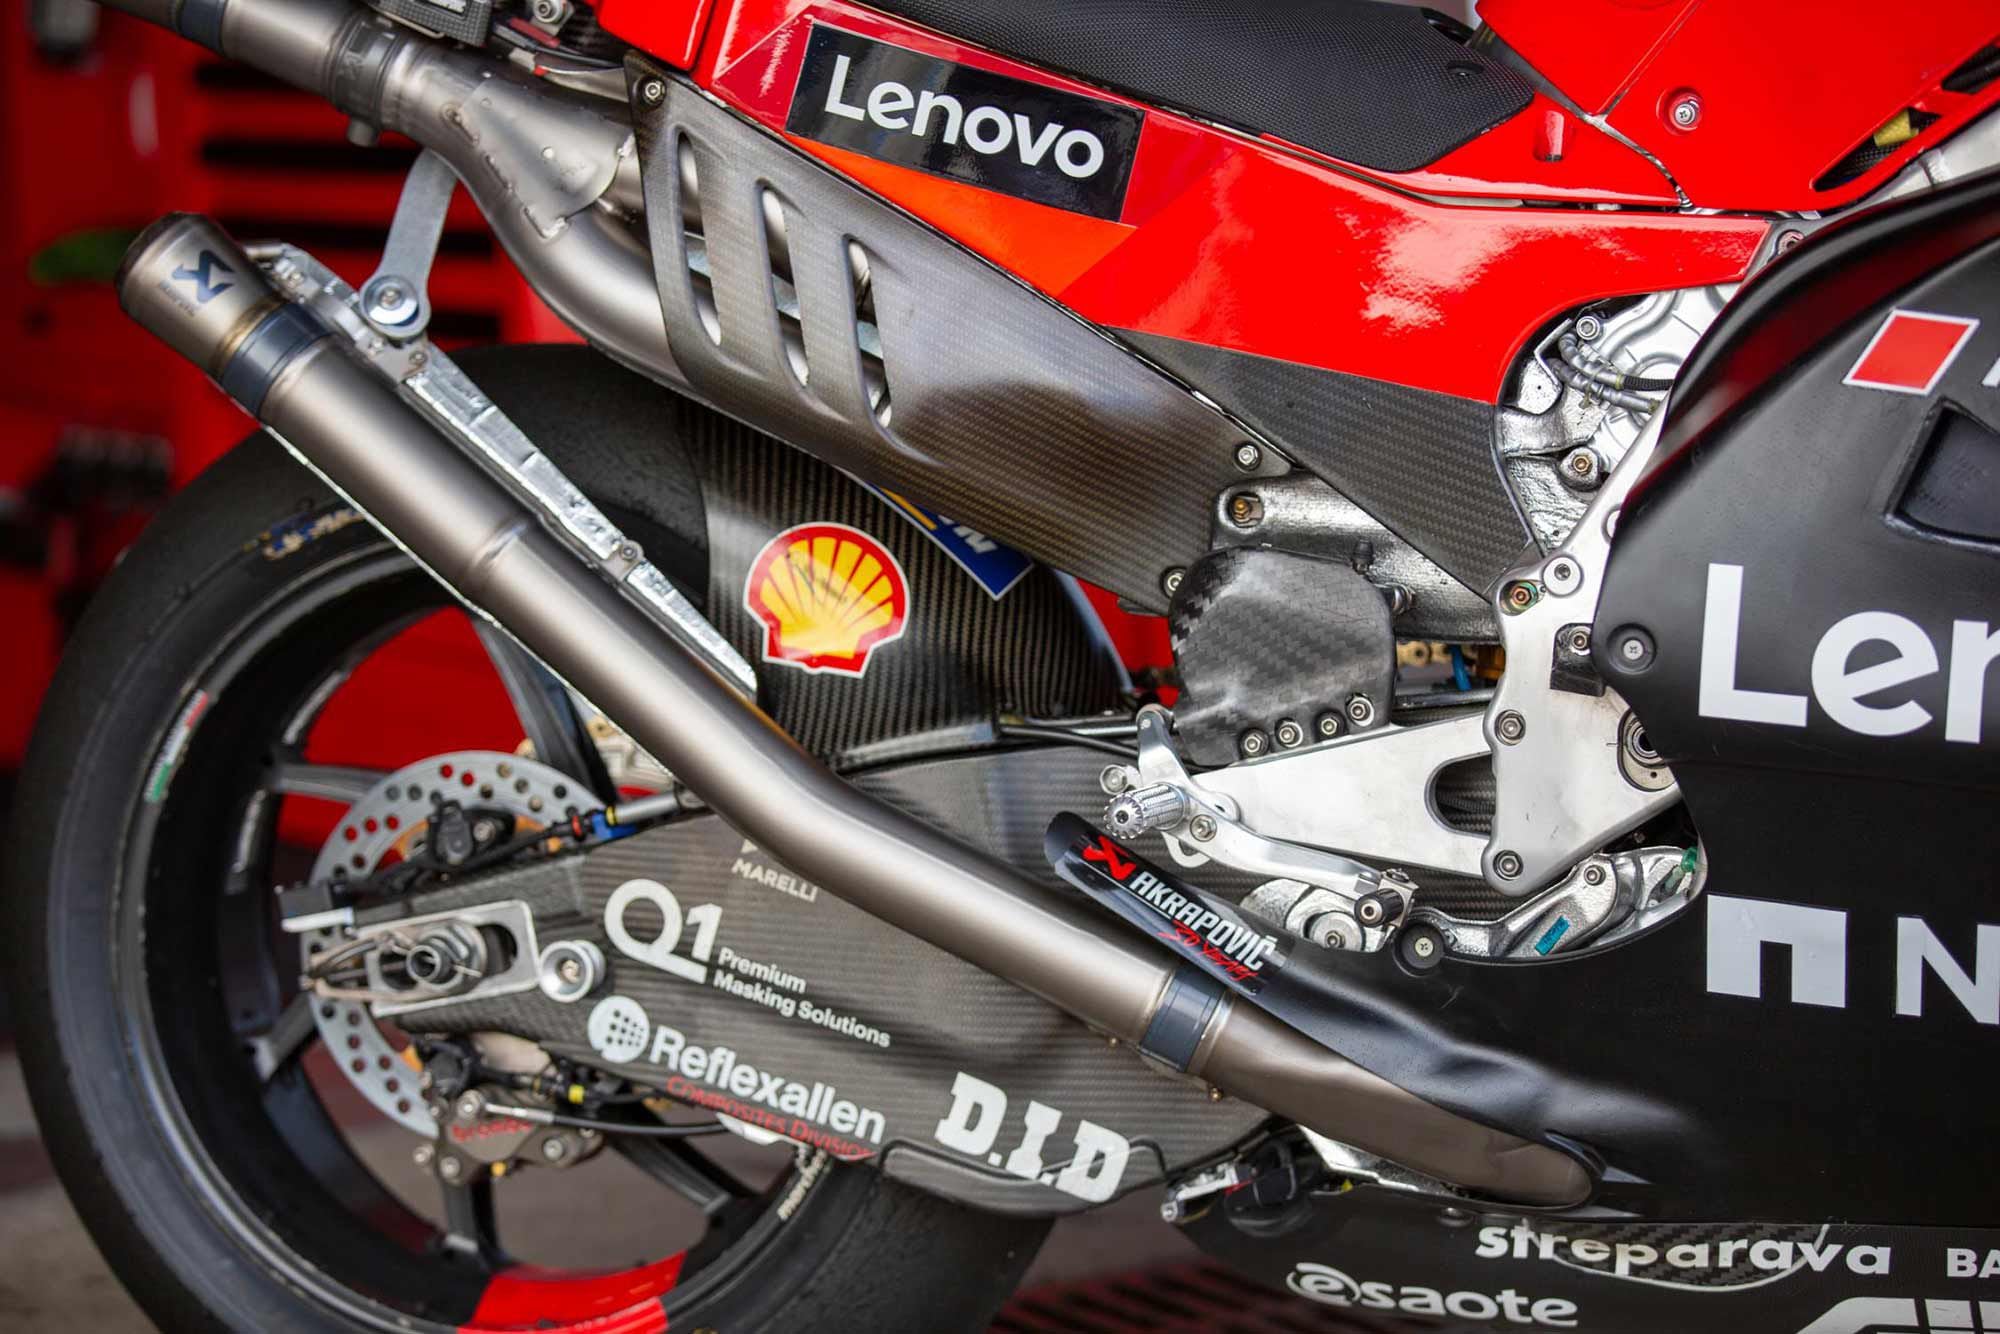 The Ducati’s get a long upswept exhaust system along with new bodywork.